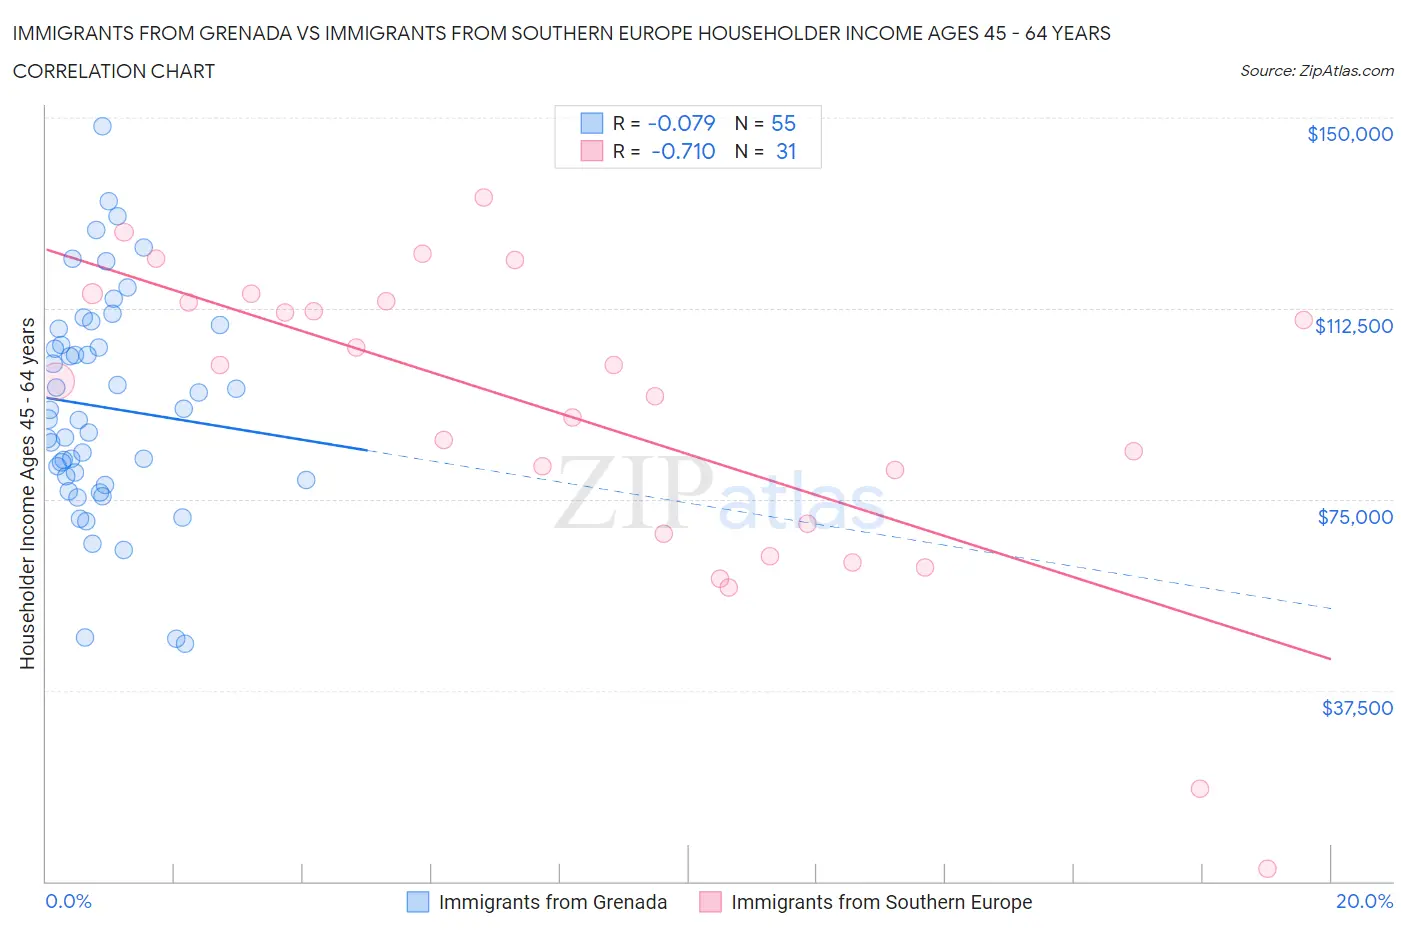 Immigrants from Grenada vs Immigrants from Southern Europe Householder Income Ages 45 - 64 years